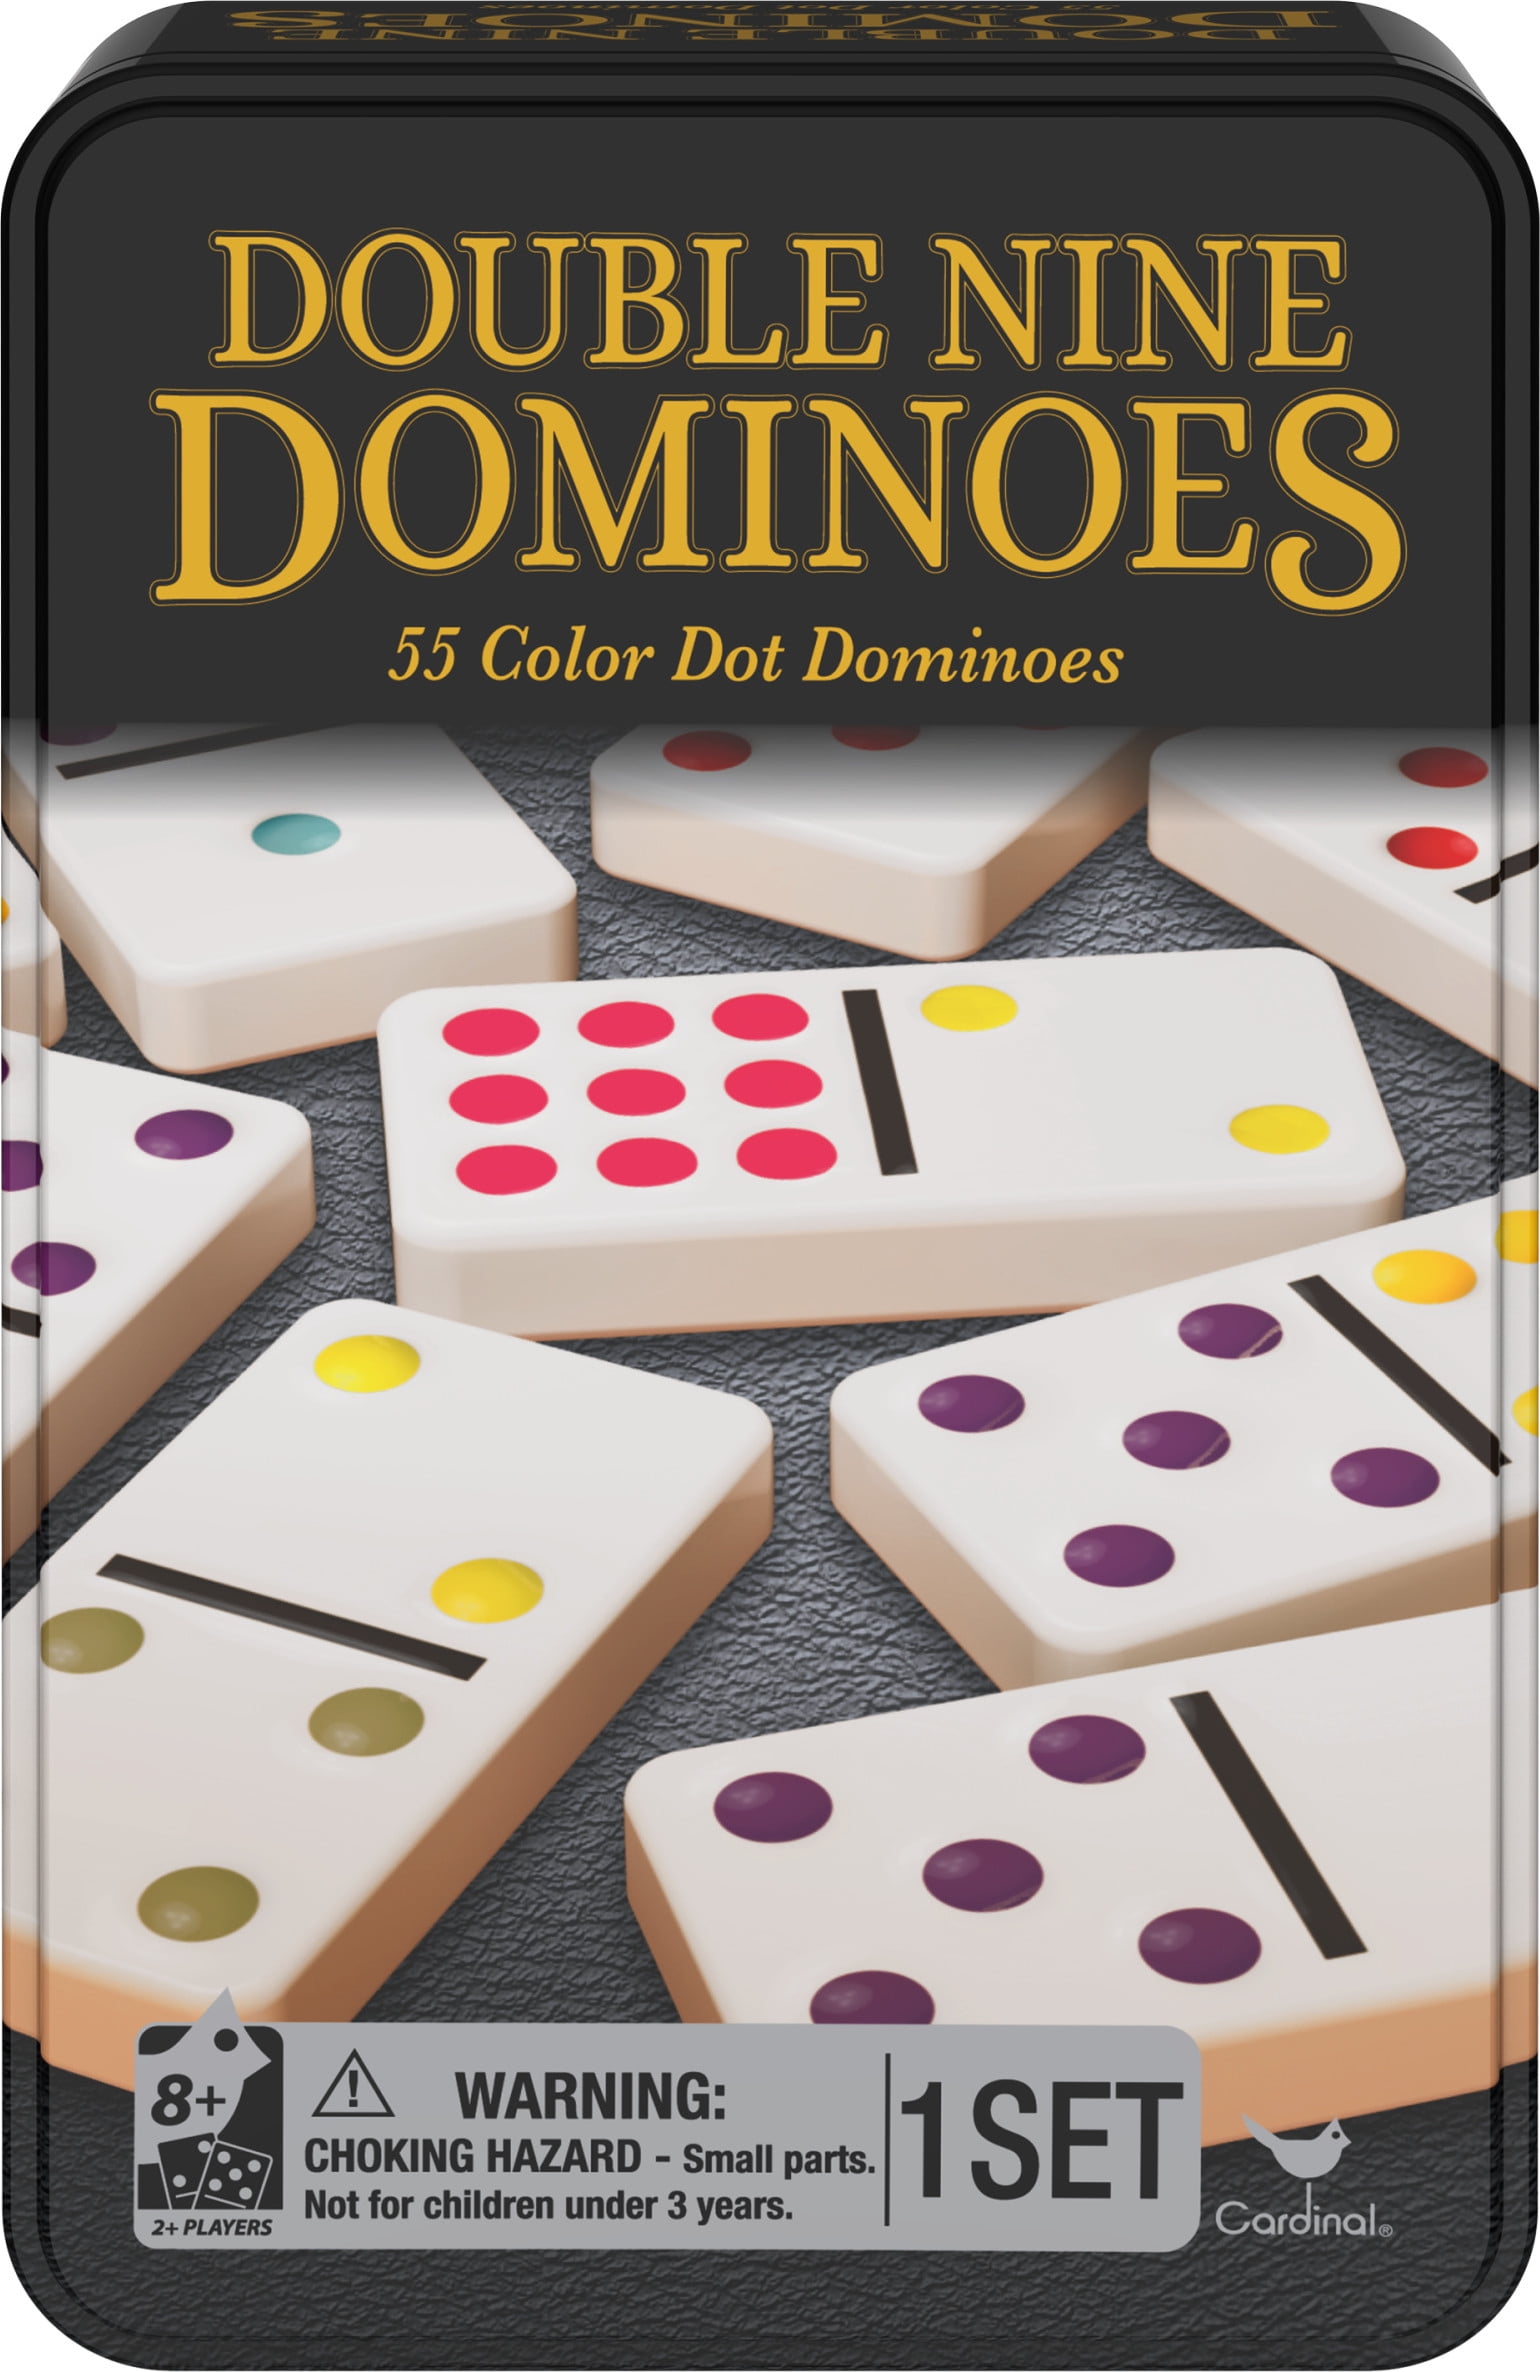 2 Boxes Of Dominoes Double Six Color Dot Set of 54 Dominoes and Instructions 